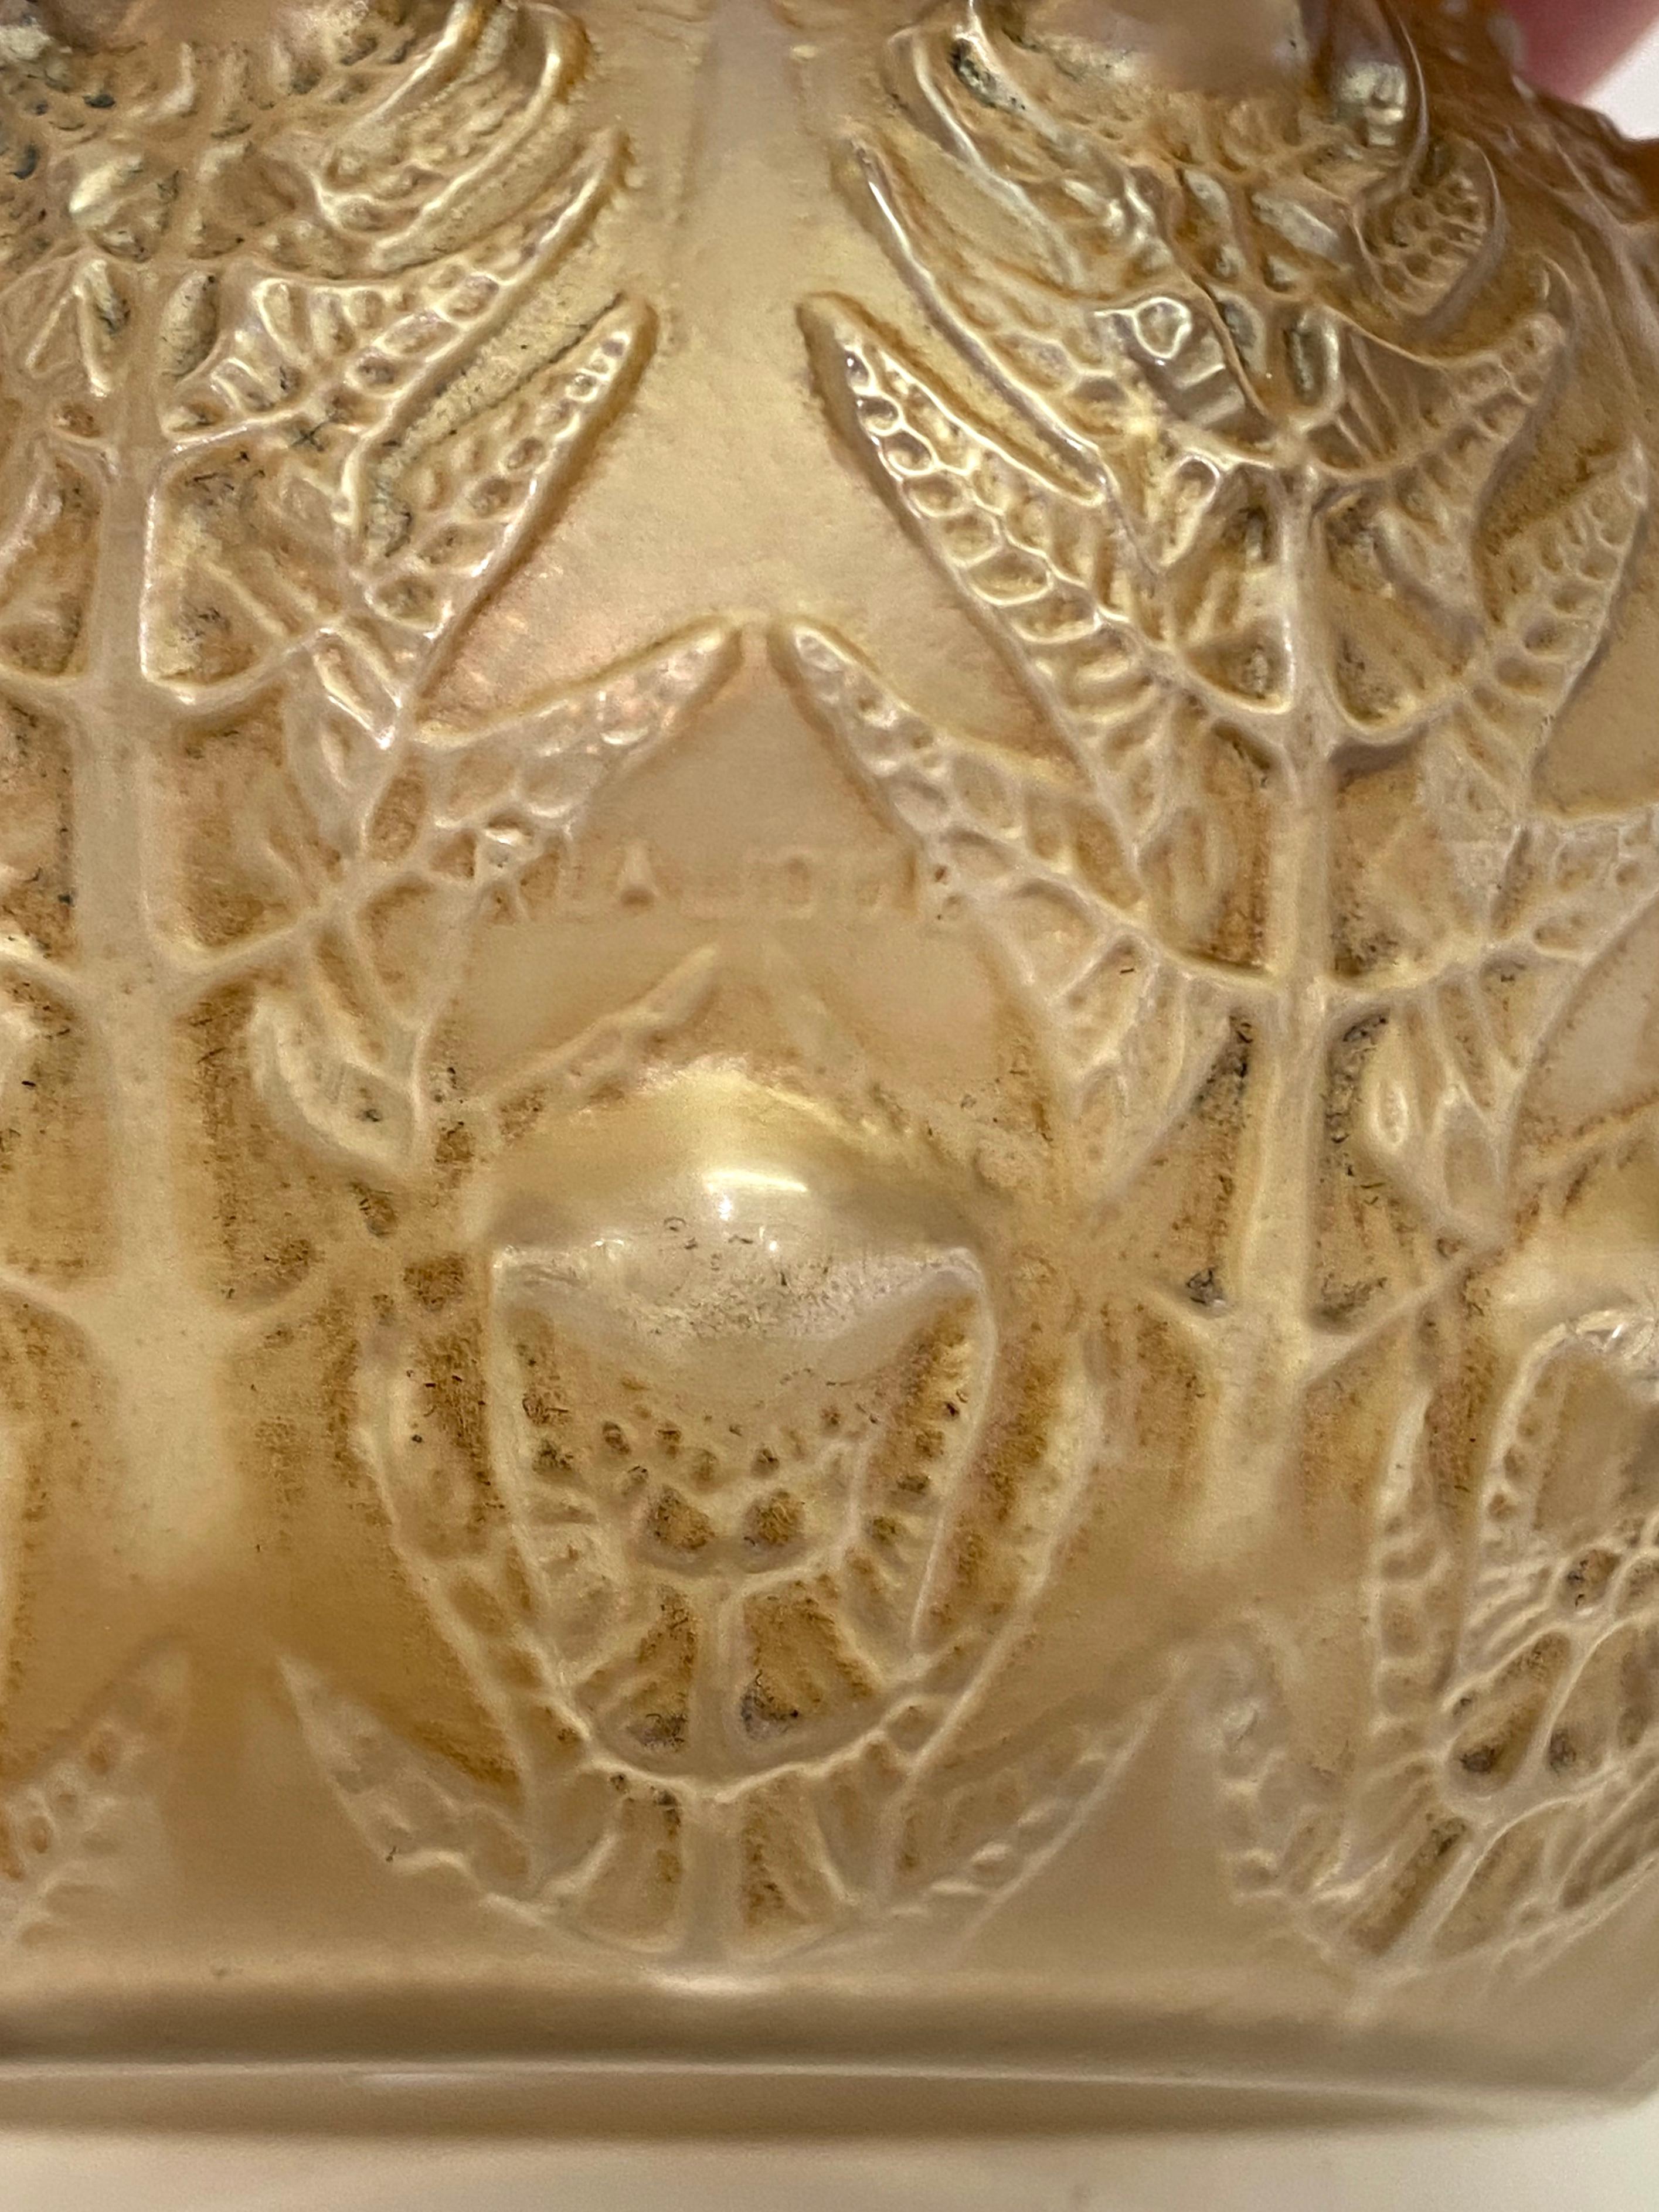 Art Deco 1912 René Lalique Fougeres Vase in Frosted Glass with Sepia Patina, Ferns